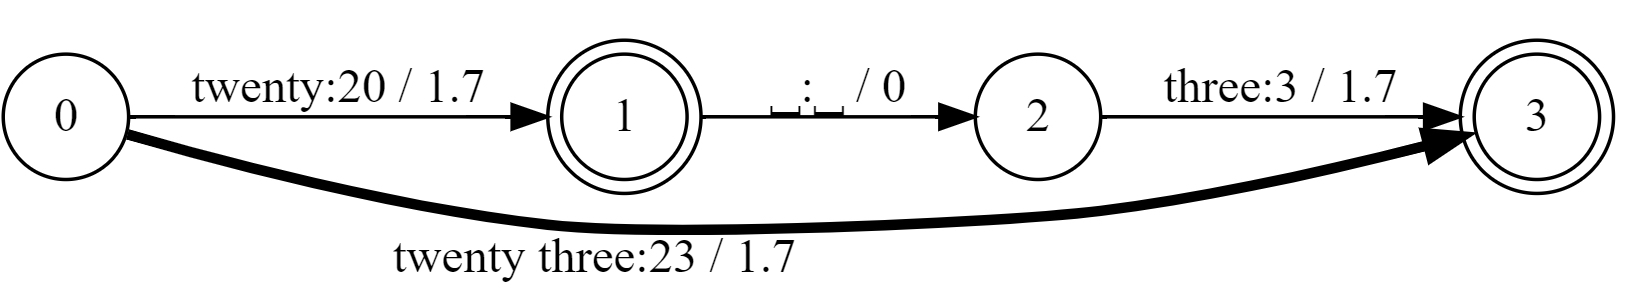 In the diagram, the shortest path is selected to output “23” instead of “20 3.”